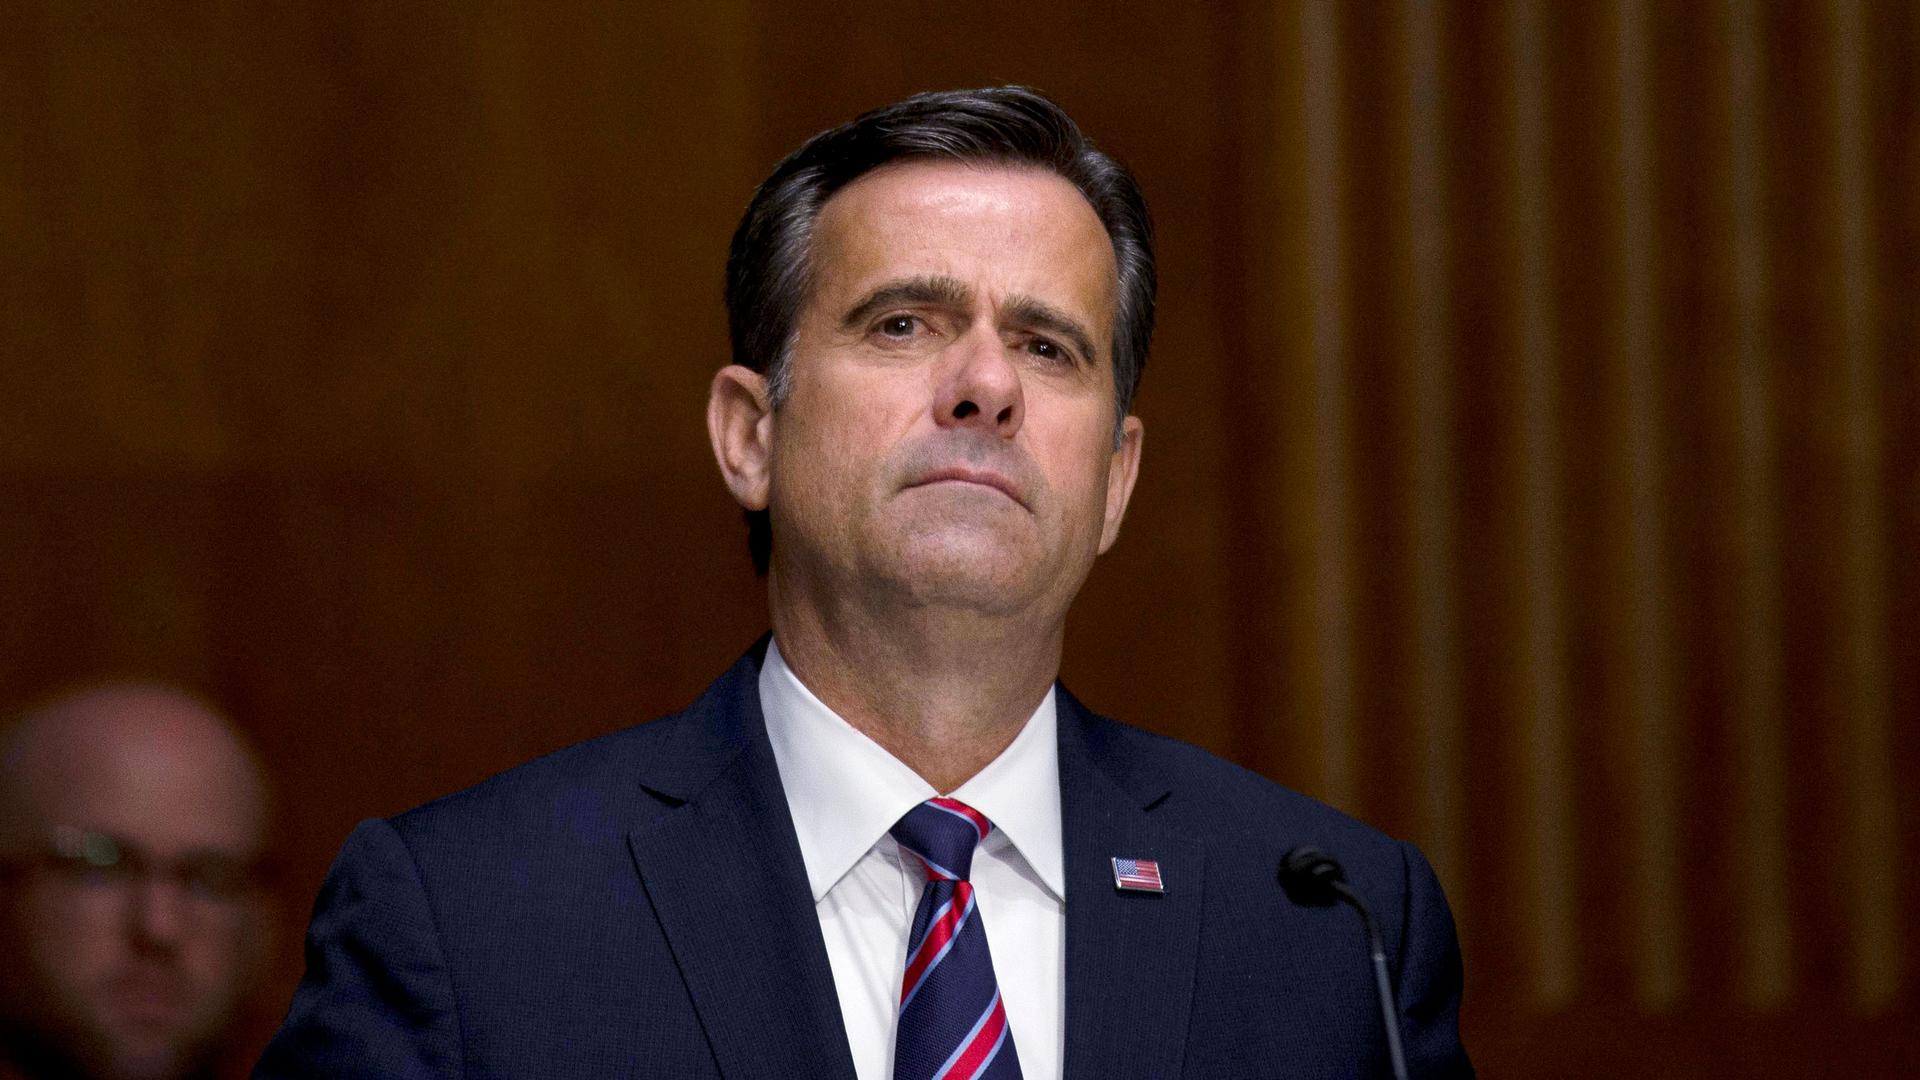 Director of National Intelligence John Ratcliffe is shown wearing a dark blue suit and striped tie with a US flag pin.